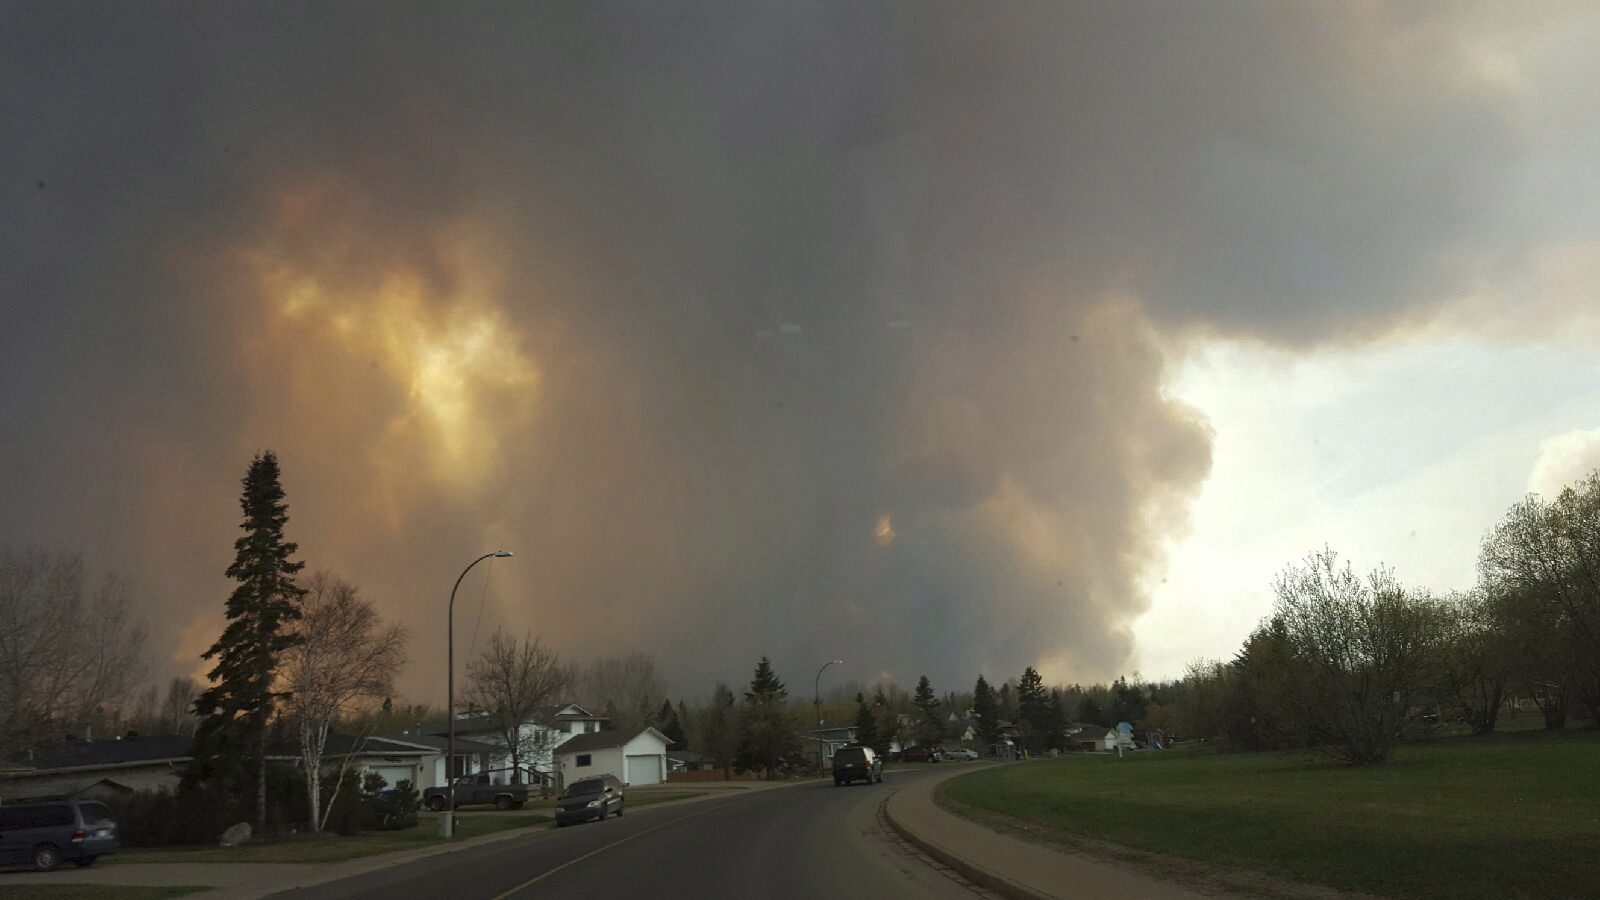 Smoke rises from a wildfire outside of Fort McMurray, Alberta, Tuesday, May 3, 2016. The entire population of the Canadian oil sands city of Fort McMurray, has been ordered to evacuate as a wildfire whipped by winds engulfed homes and sent ash raining down on residents. (Mary Anne Sexsmith-Segato/The Canadian Press via AP) MANDATORY CREDIT